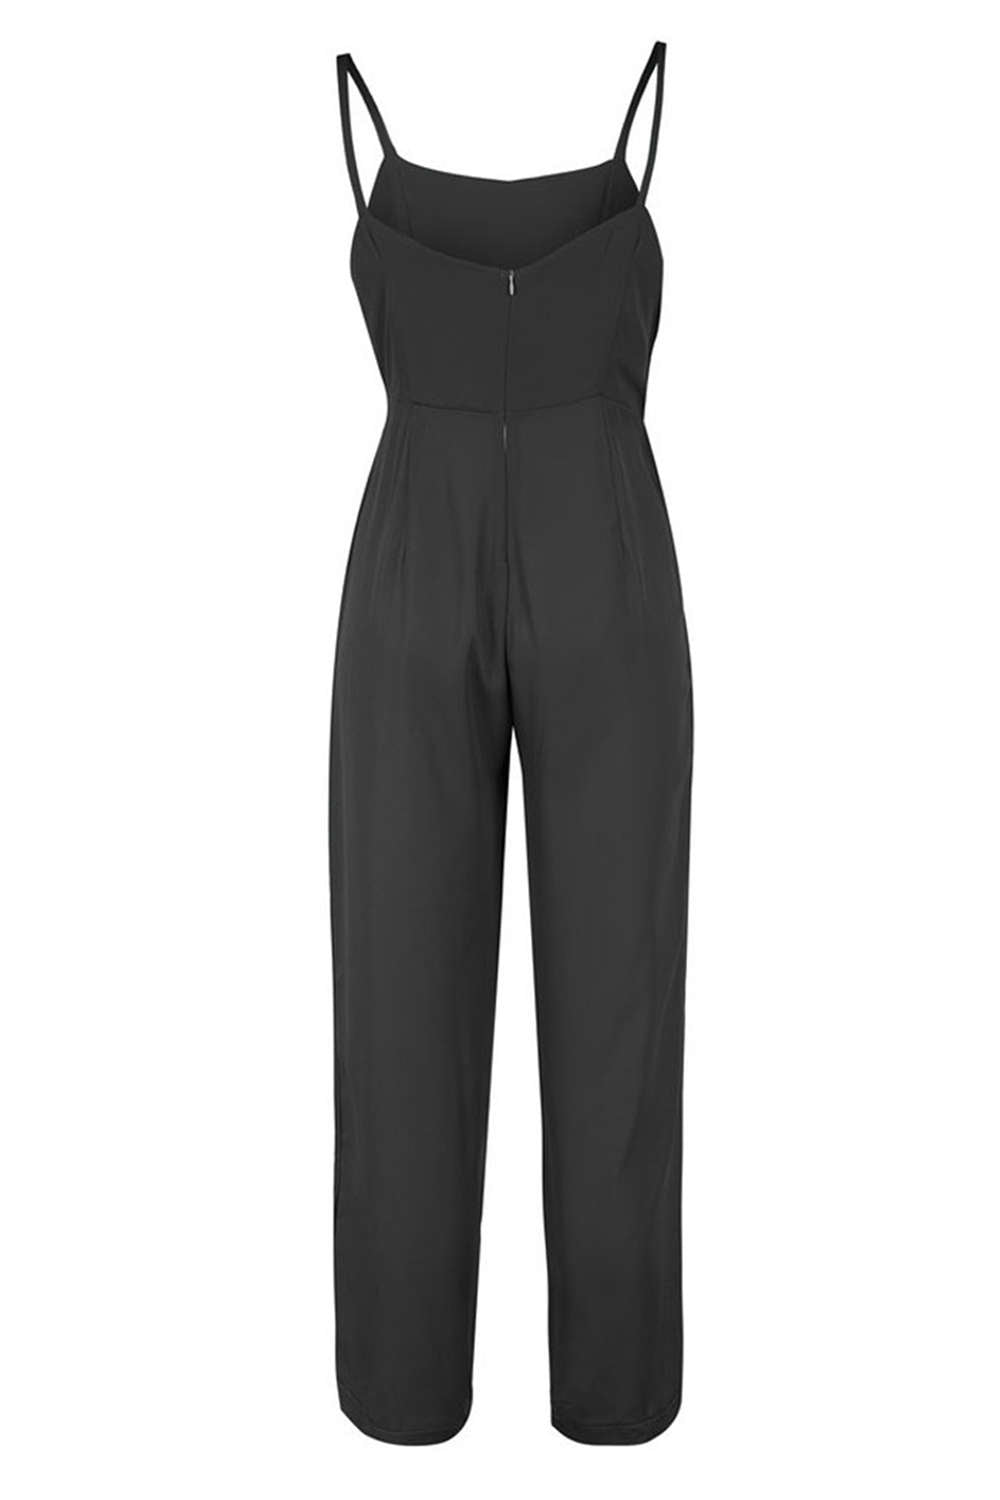 Iyasson Solid Sleeveless Backless Wide Leg Sexy Jumpsuits